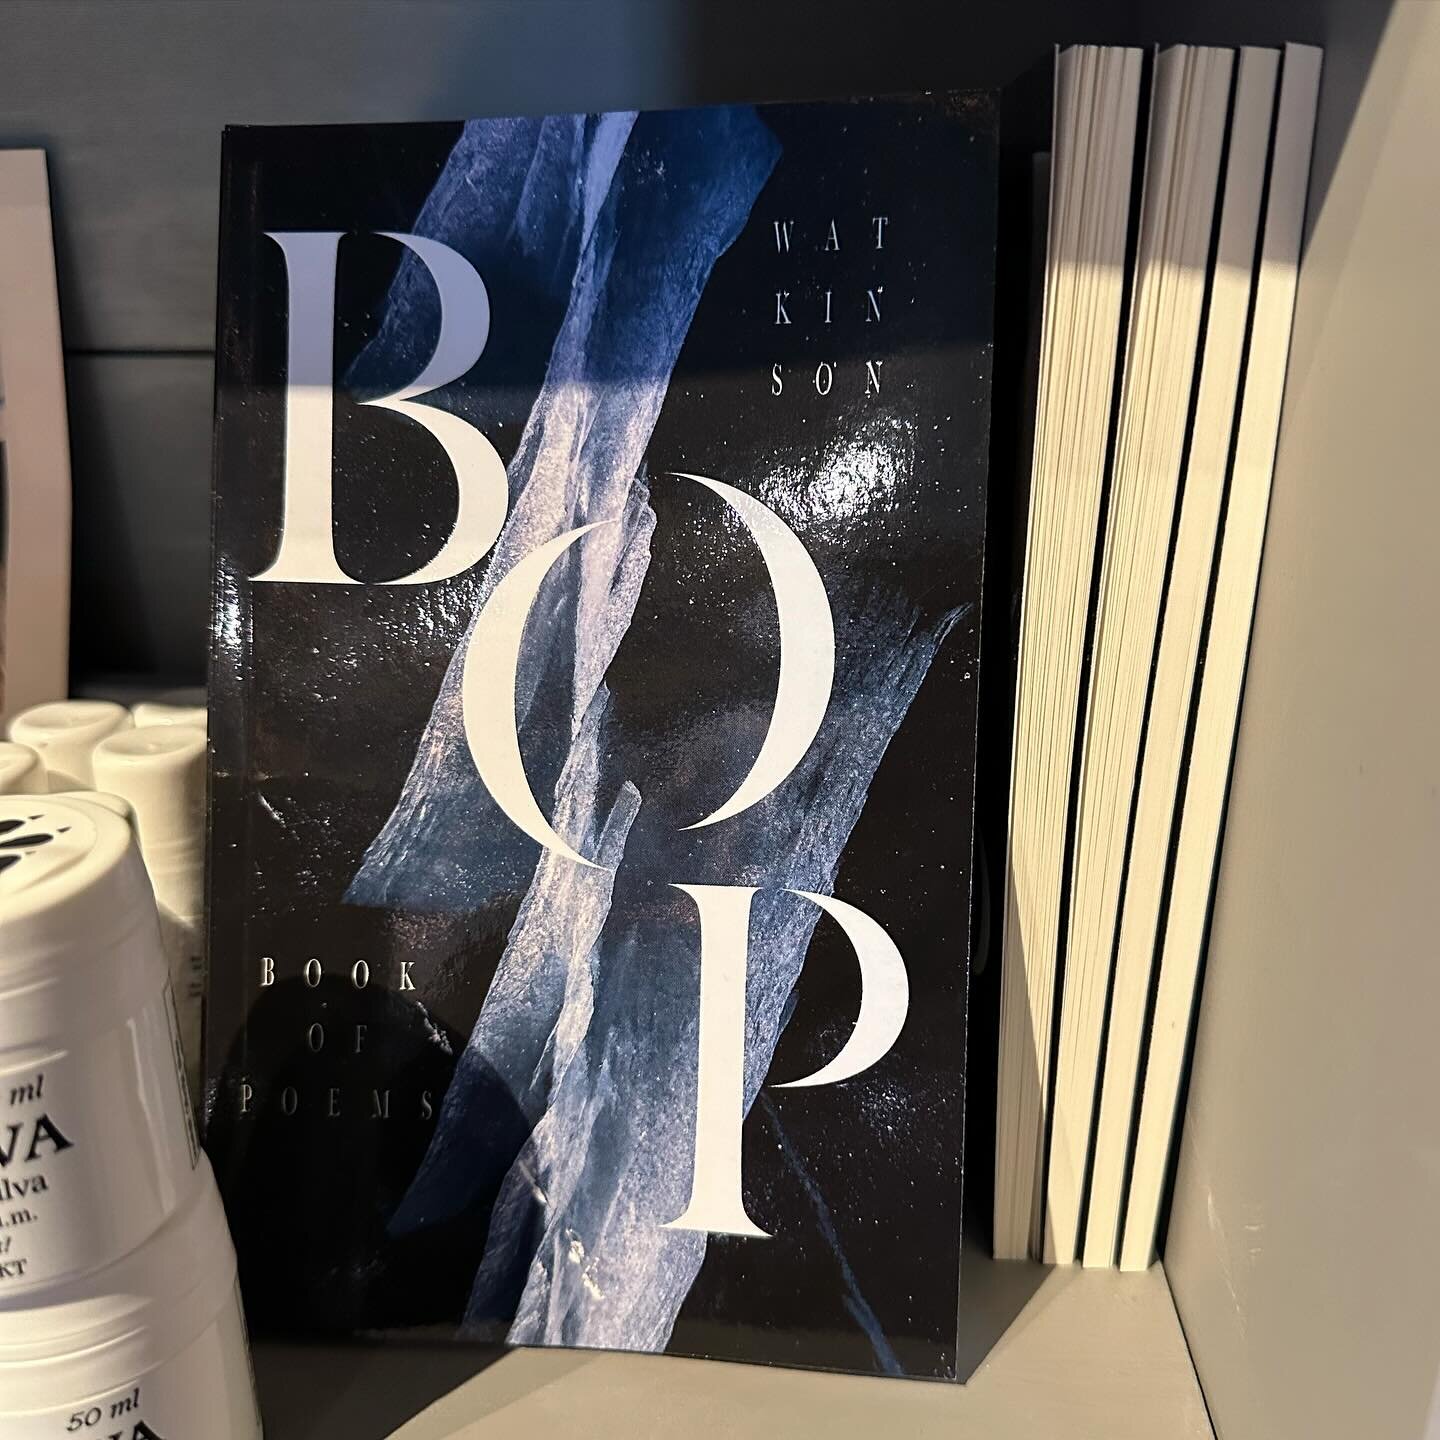 BOP &mdash; Book of Poems. Now available at Farmhouse Delsbo!

 #poetry #literature #book #bookofpoems #farmhouse #delsbo #poems #lwstudios